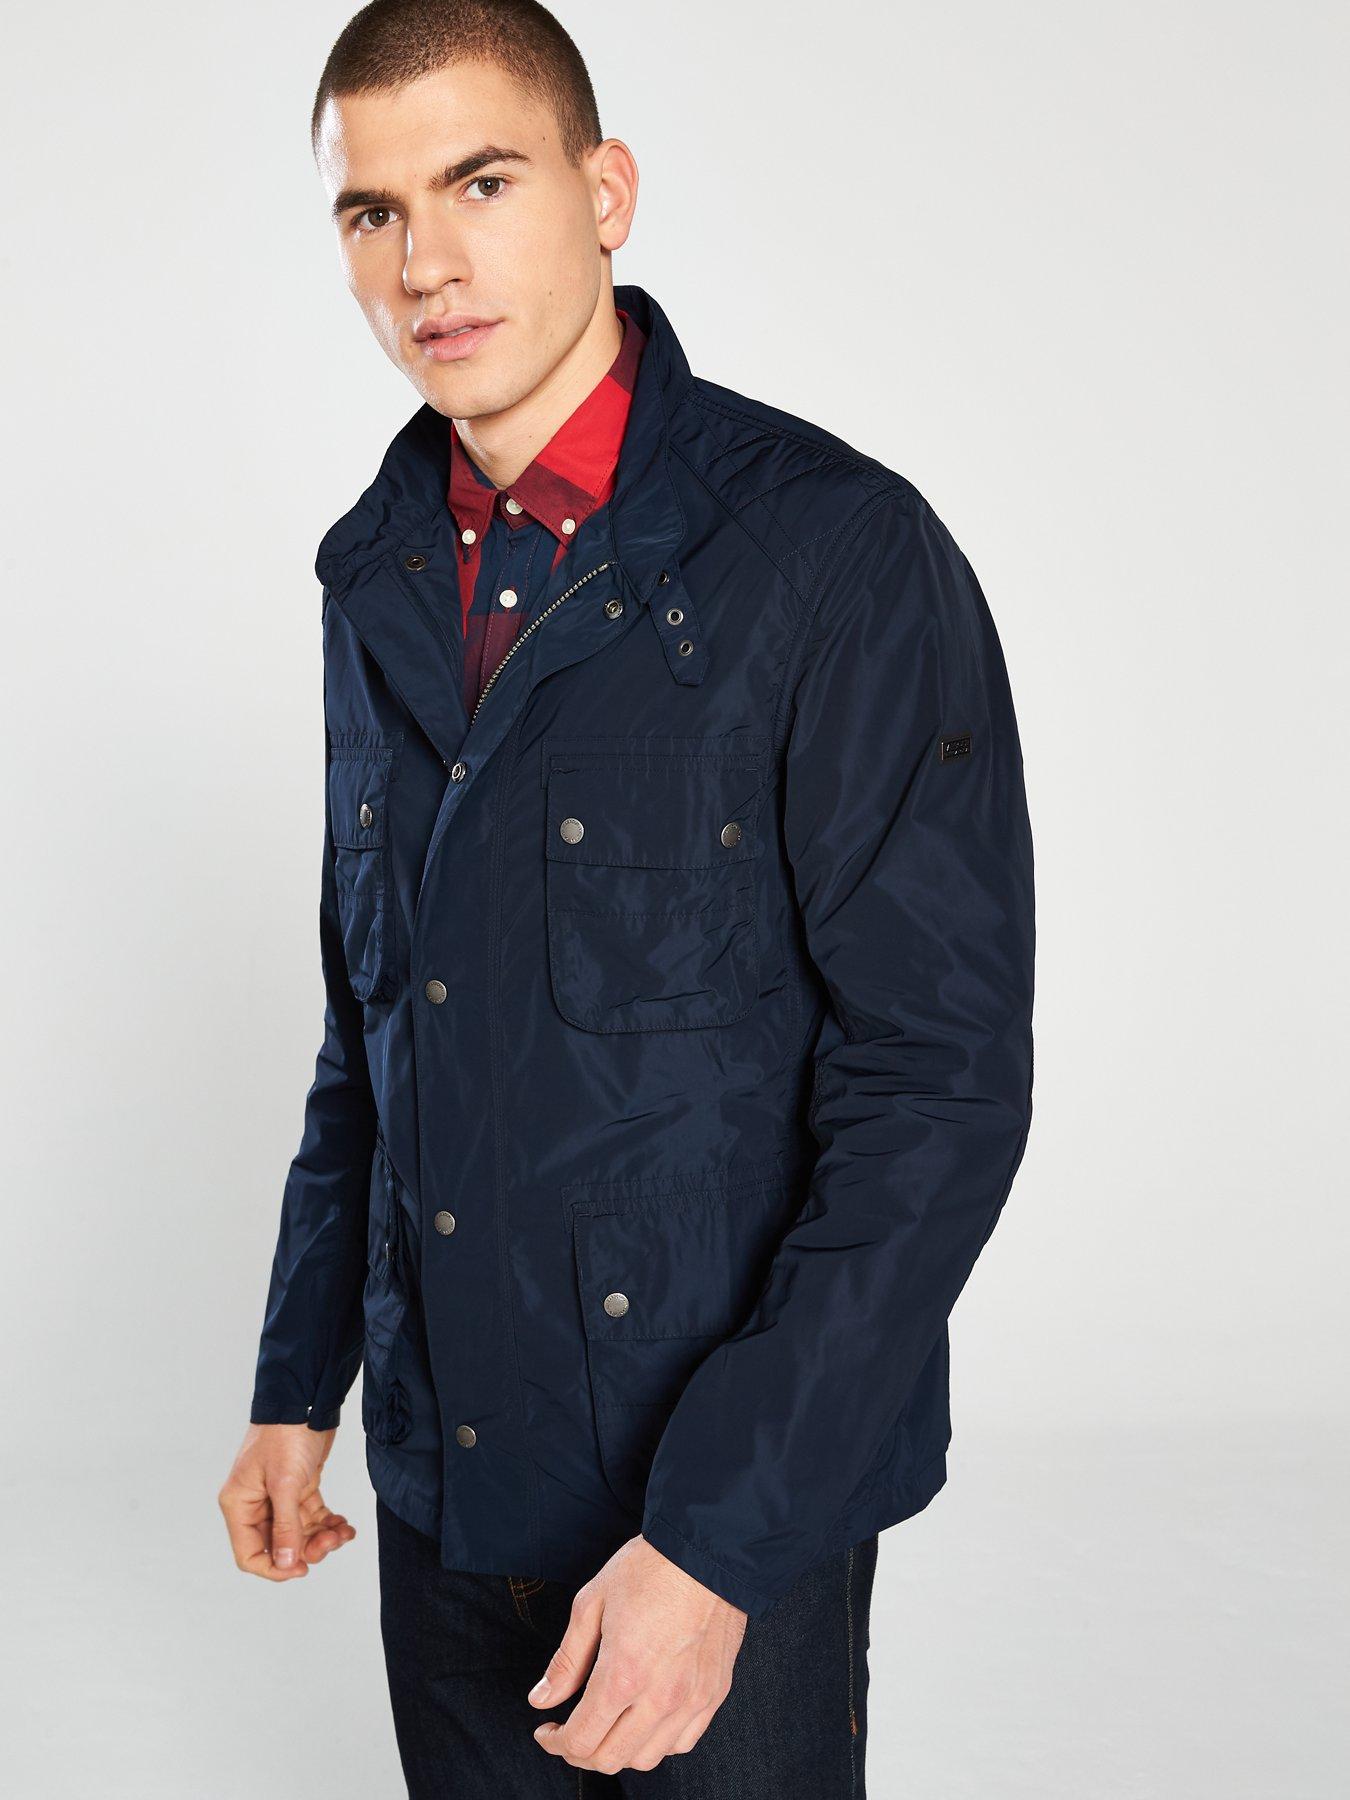 barbour weir jacket review